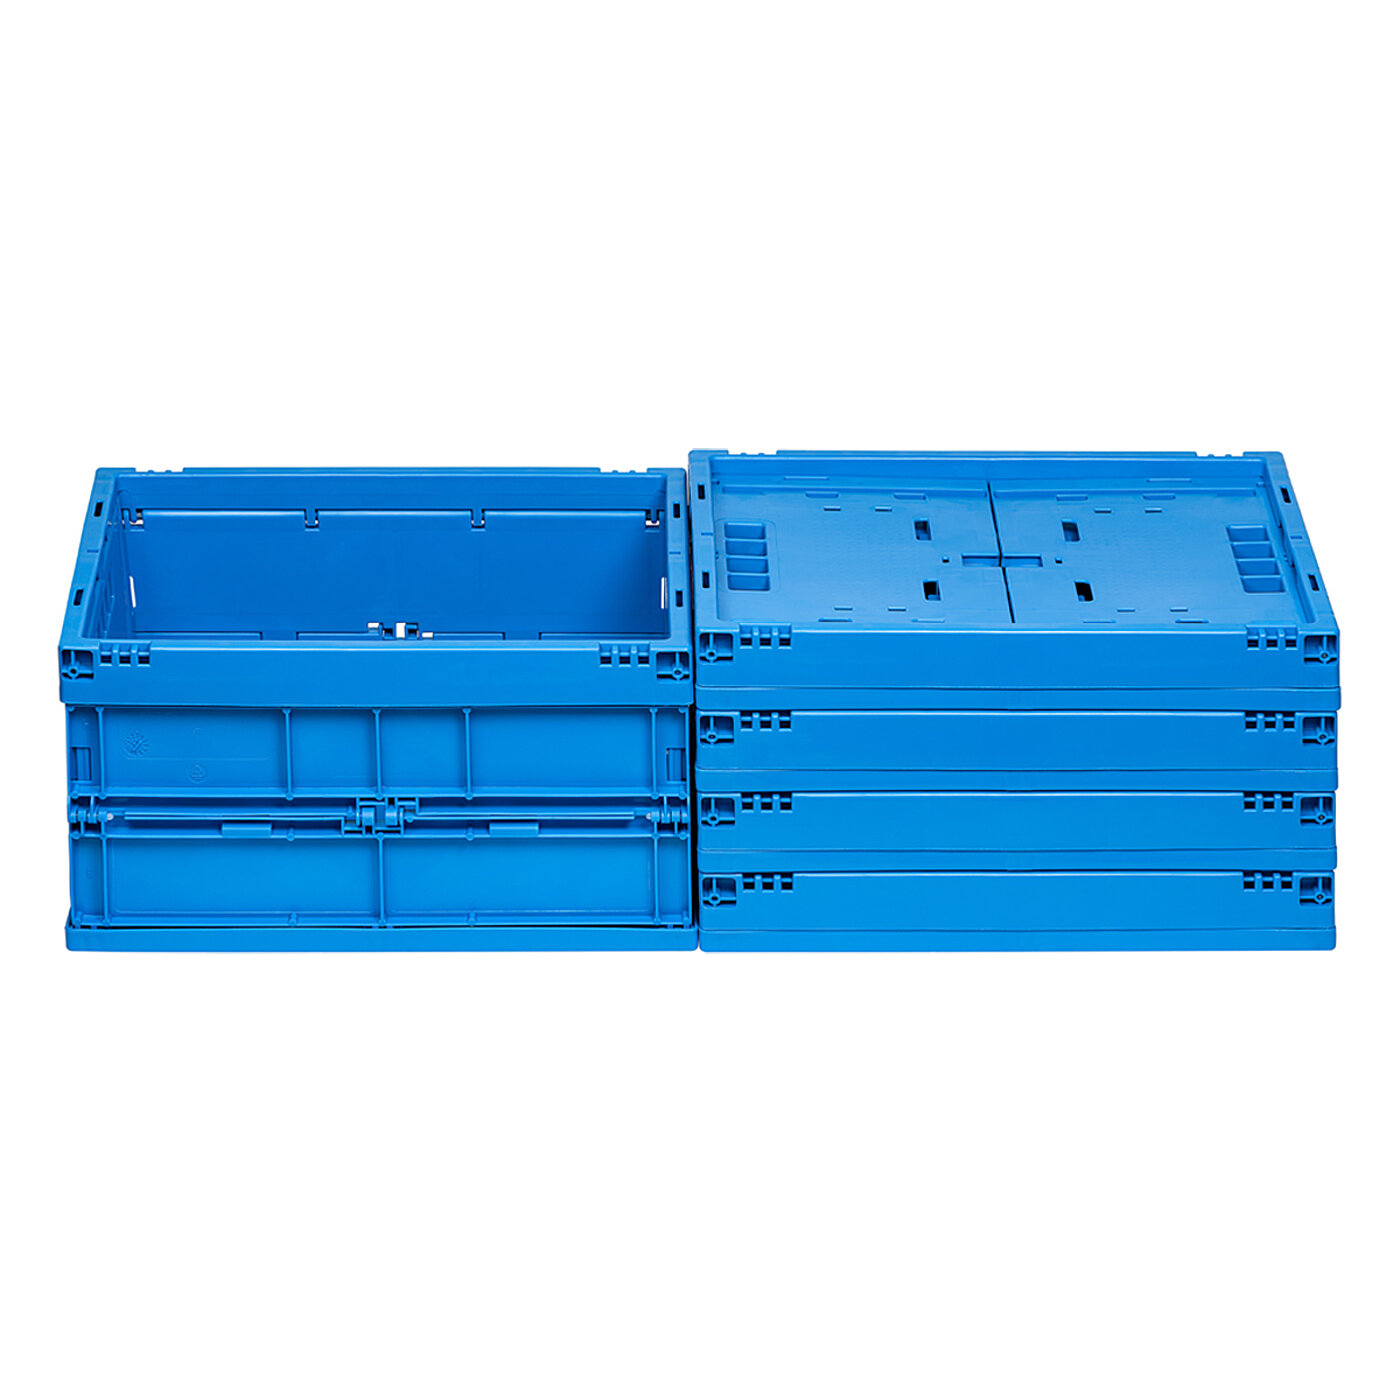 a blue foldable box made of plastics, in long side view, left of a stack of four fully collapsed blue foldable boxes, isolated on white background